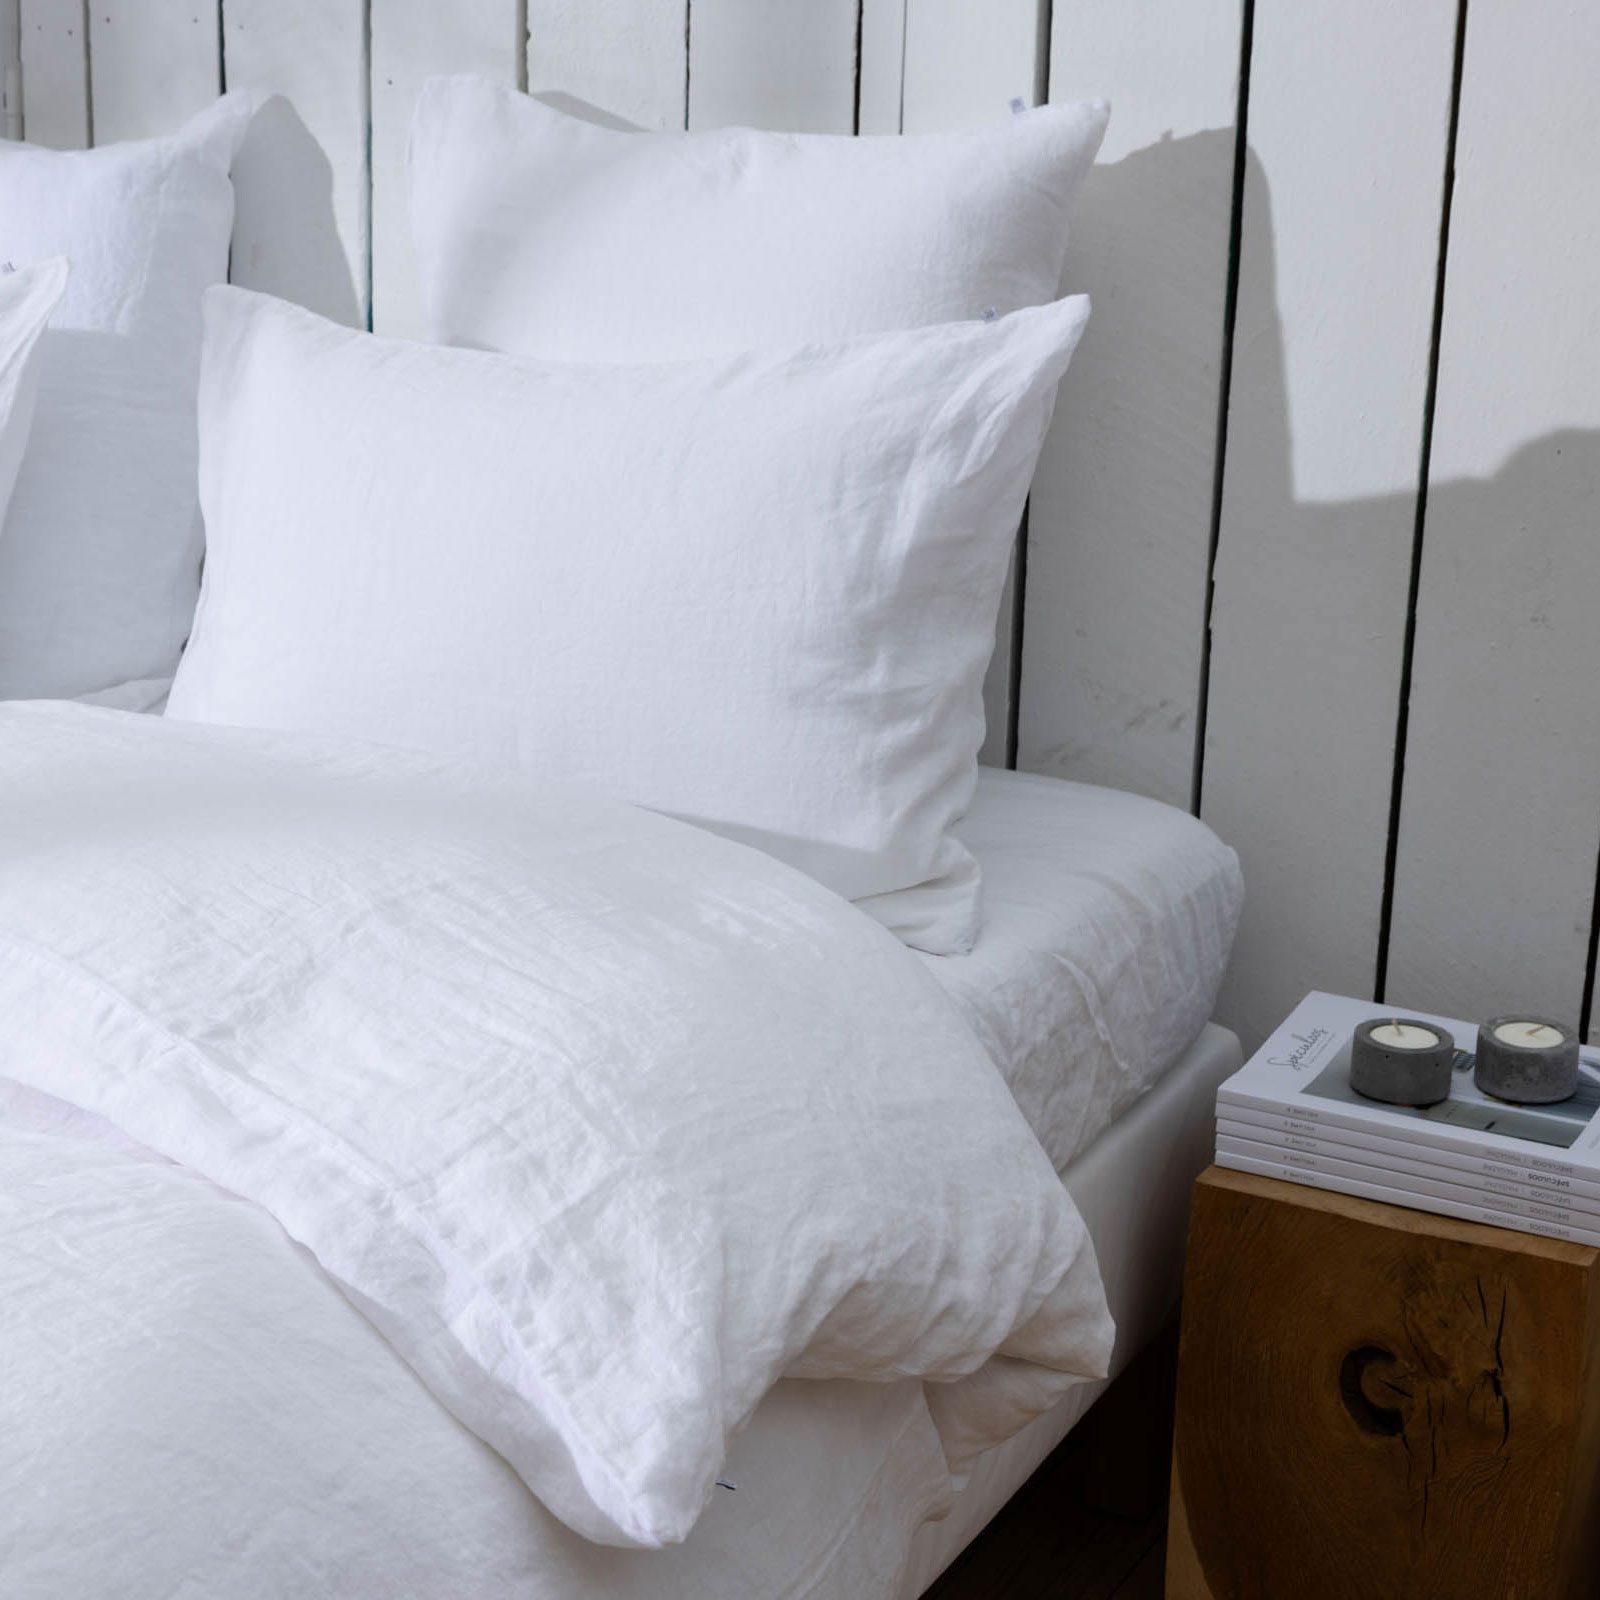 stone-washed-linen-duvet-cover-snow-white-3